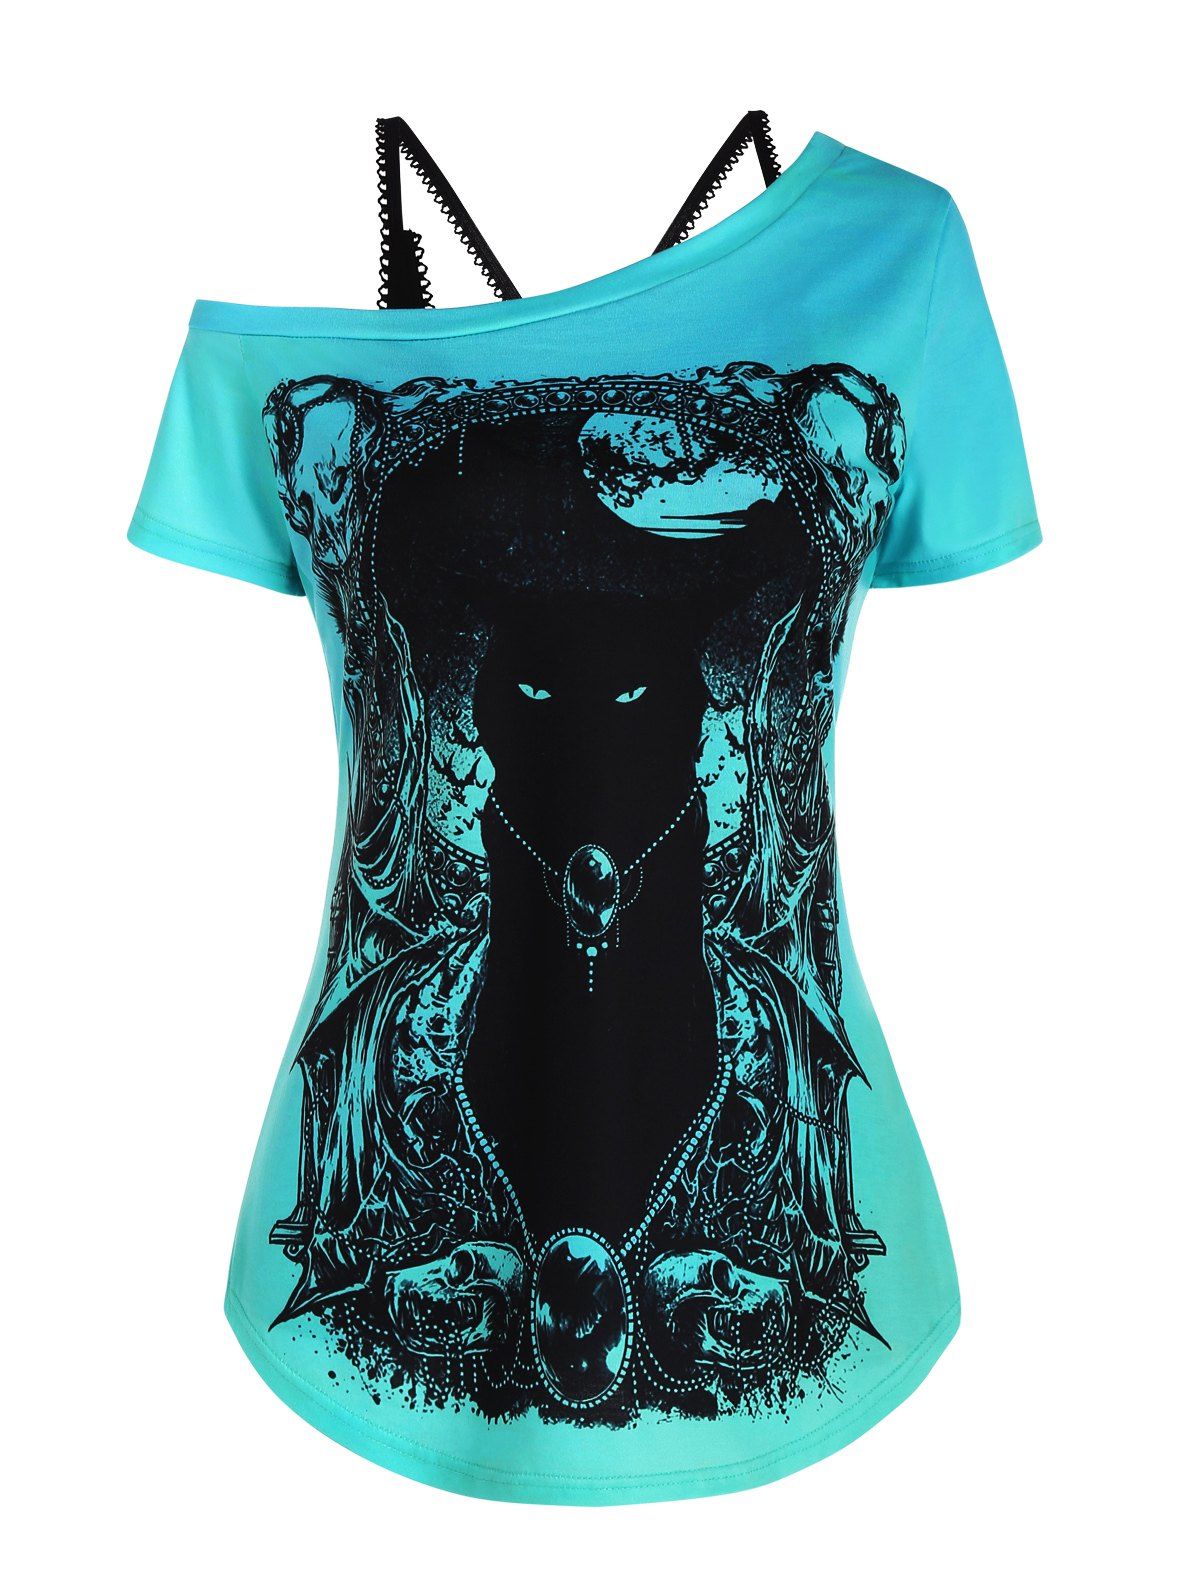 Gothic Cat Skull Print Skew Neck Tee and Cami Top Two Piece Set - GREEN XL